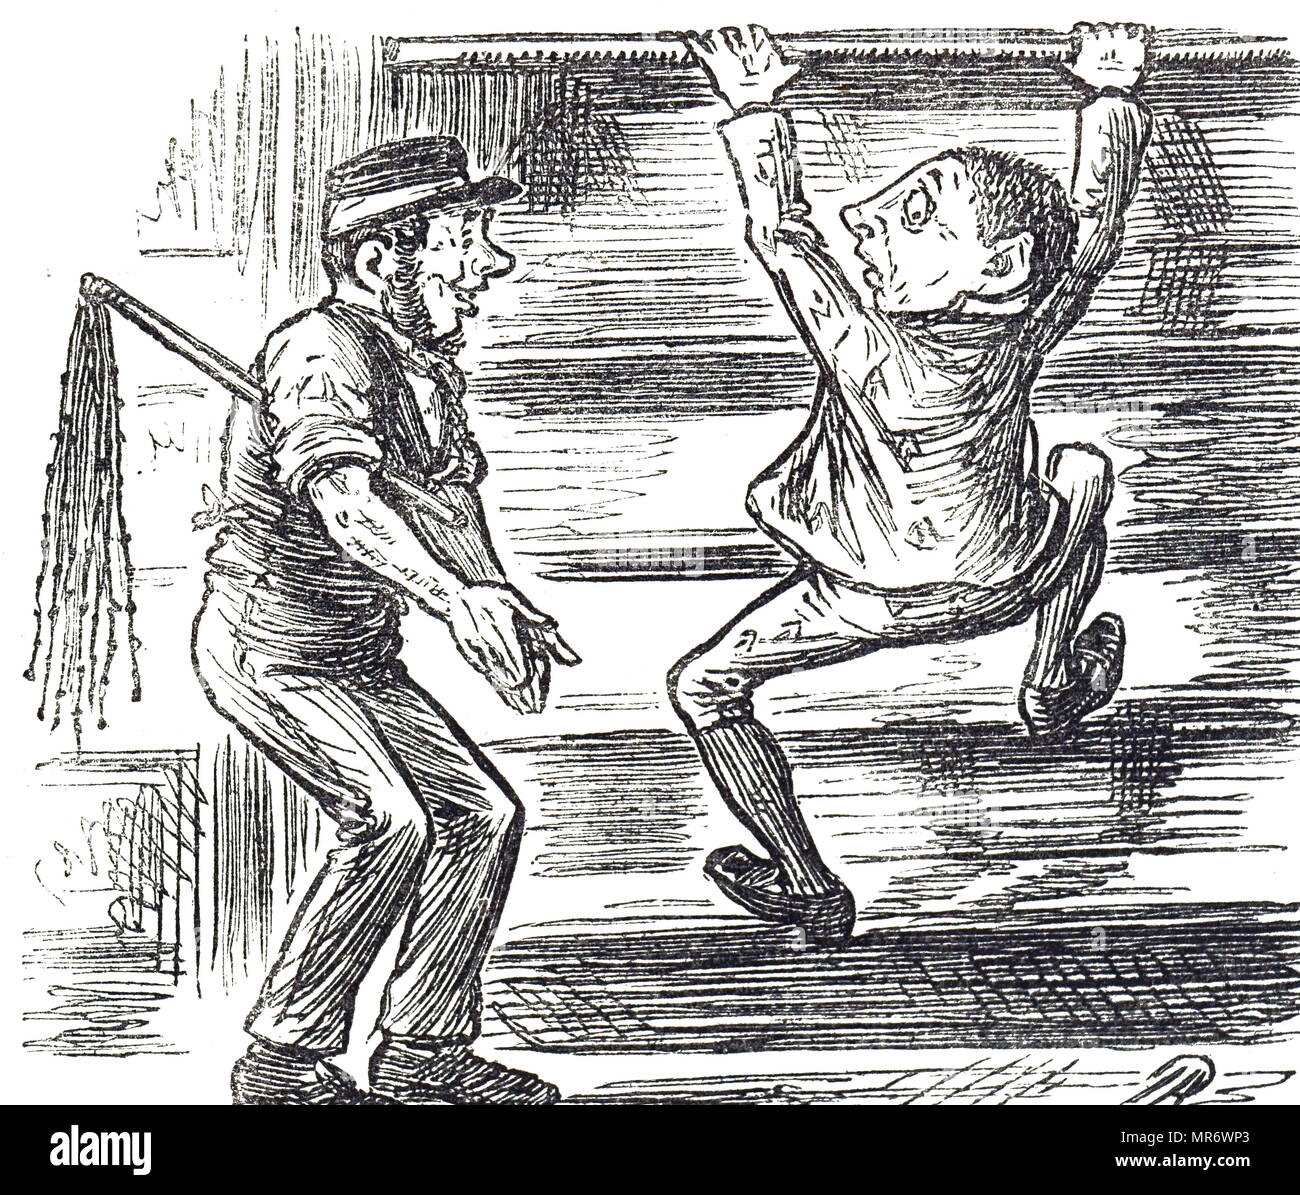 Cartoon depicting a prison officer with a cat-'o-nine-tails. Dated 19th century Stock Photo